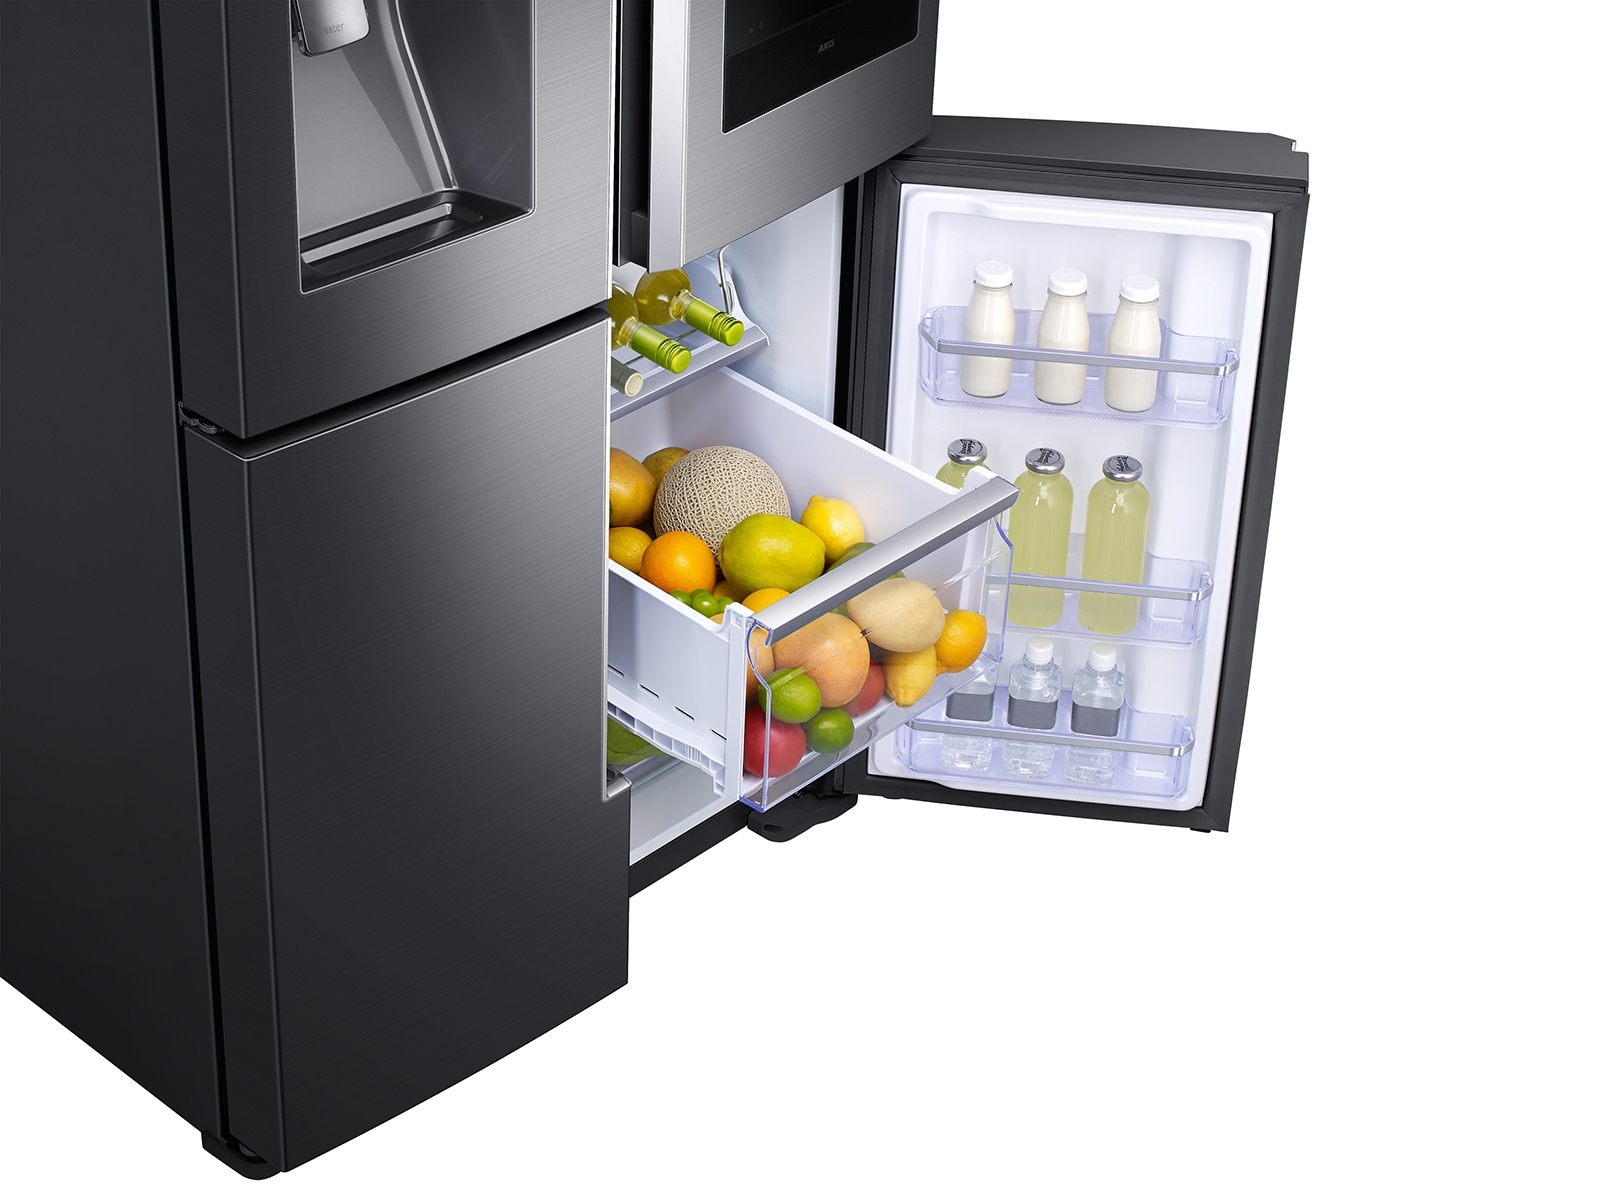 Ultra Slim Wine Refrigerator | 10 Wide with Adjustable Temperatures and Touchscreen Controls | Holds 18 Bottles of Wine